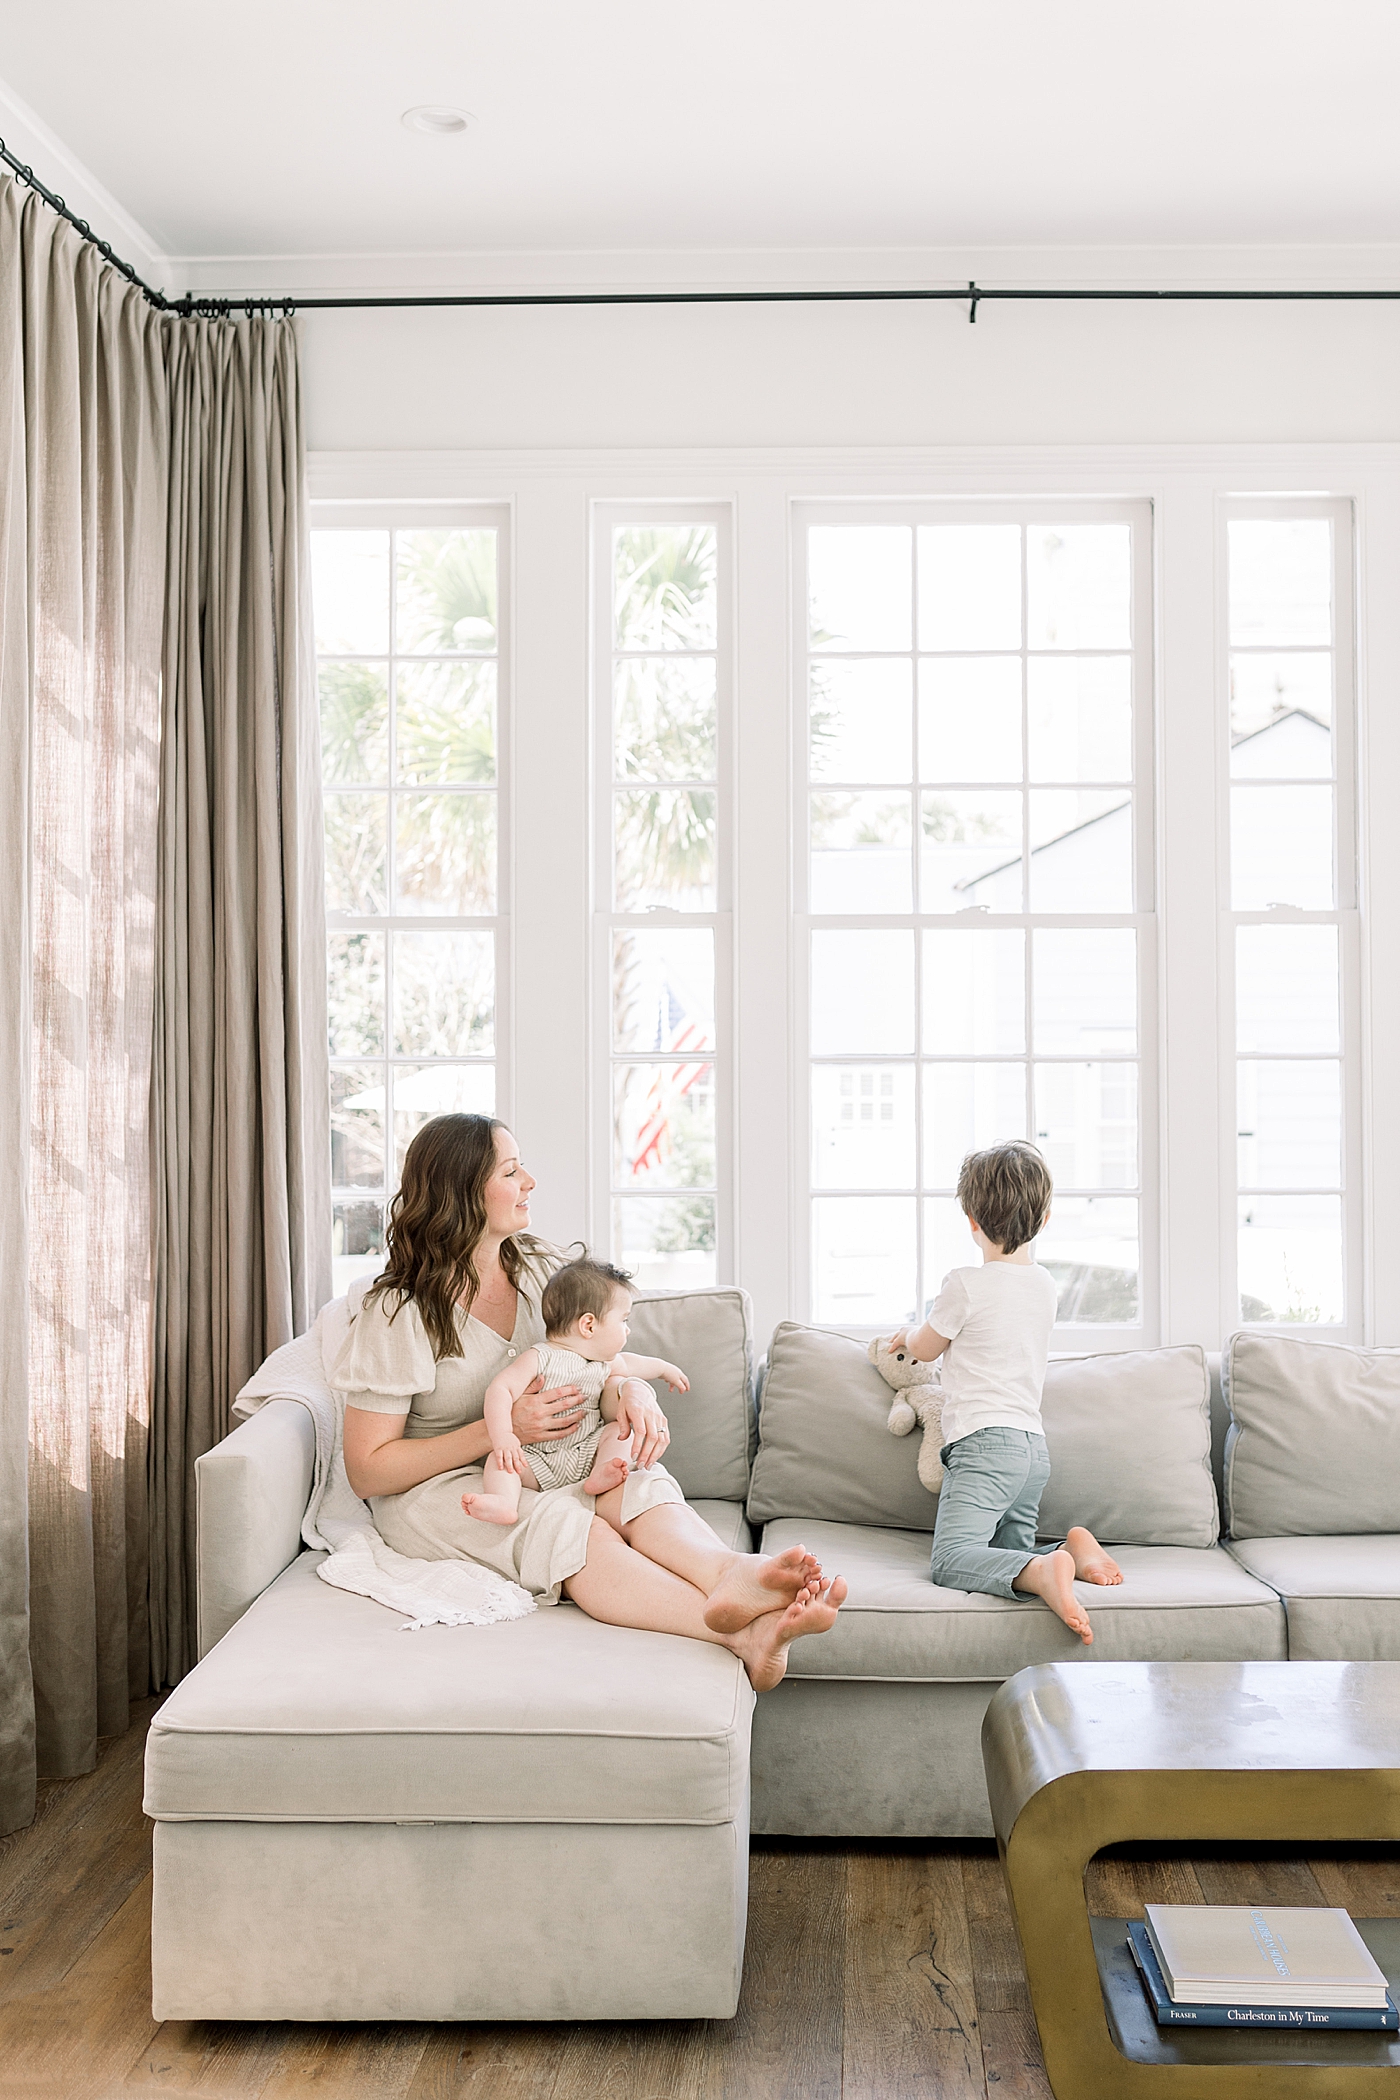 Mother and her two children on a neutral sofa in a clean, neutral room | Image by Caitlyn Motycka 